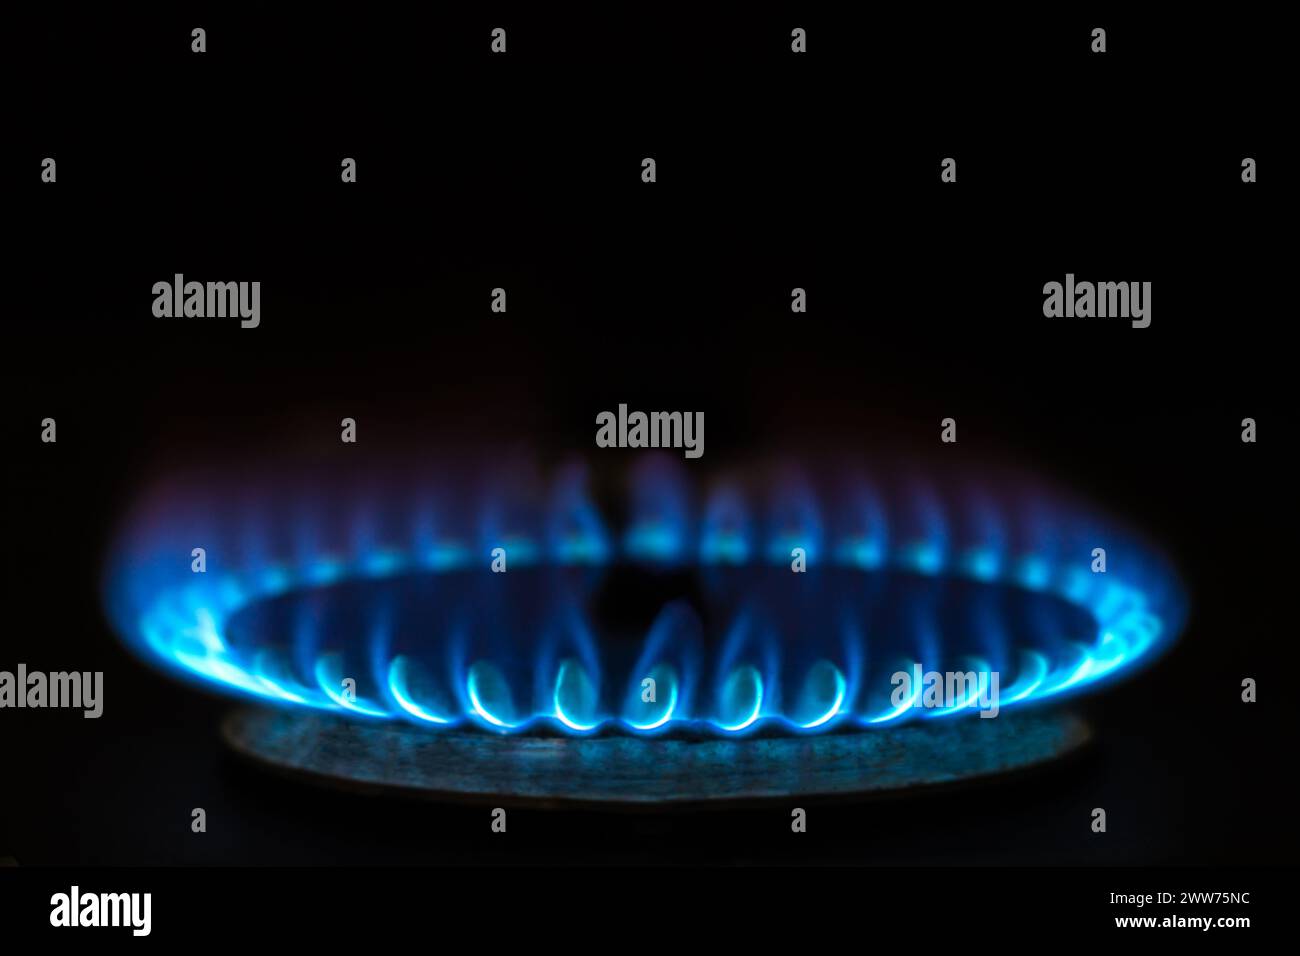 Close-up of a burner, blue flames, on a black background. Stock Photo